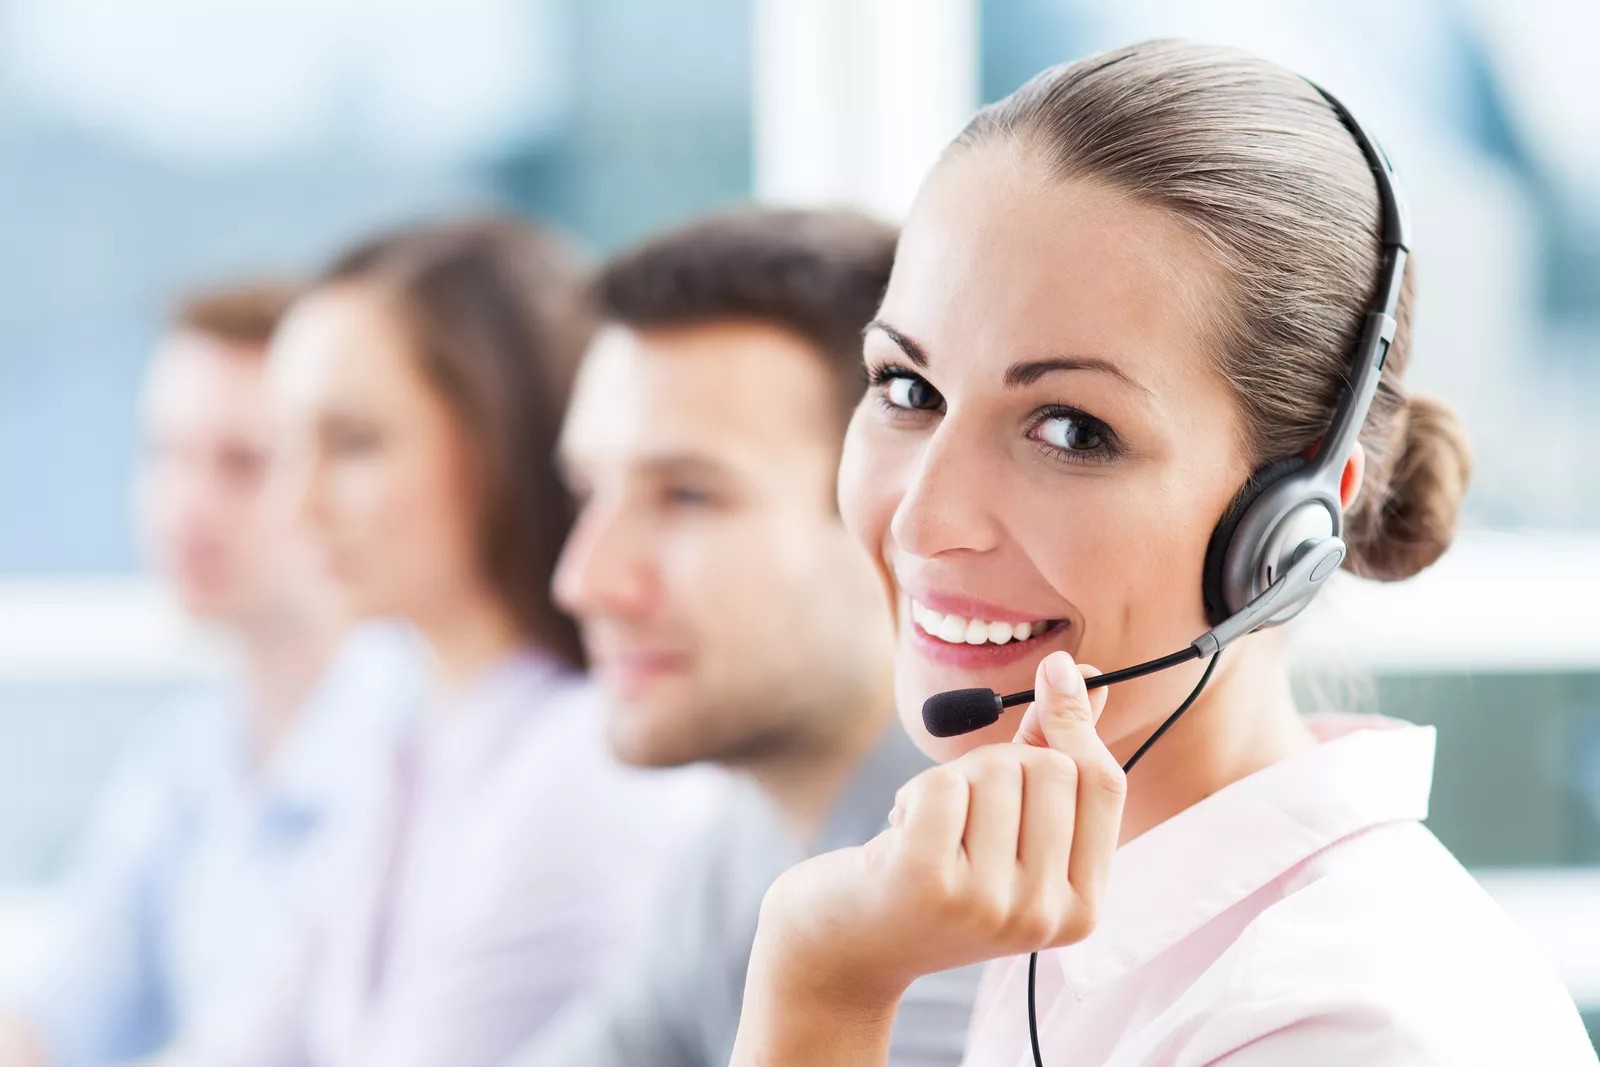 5 Common Customer Service Mistakes and How to Avoid Them